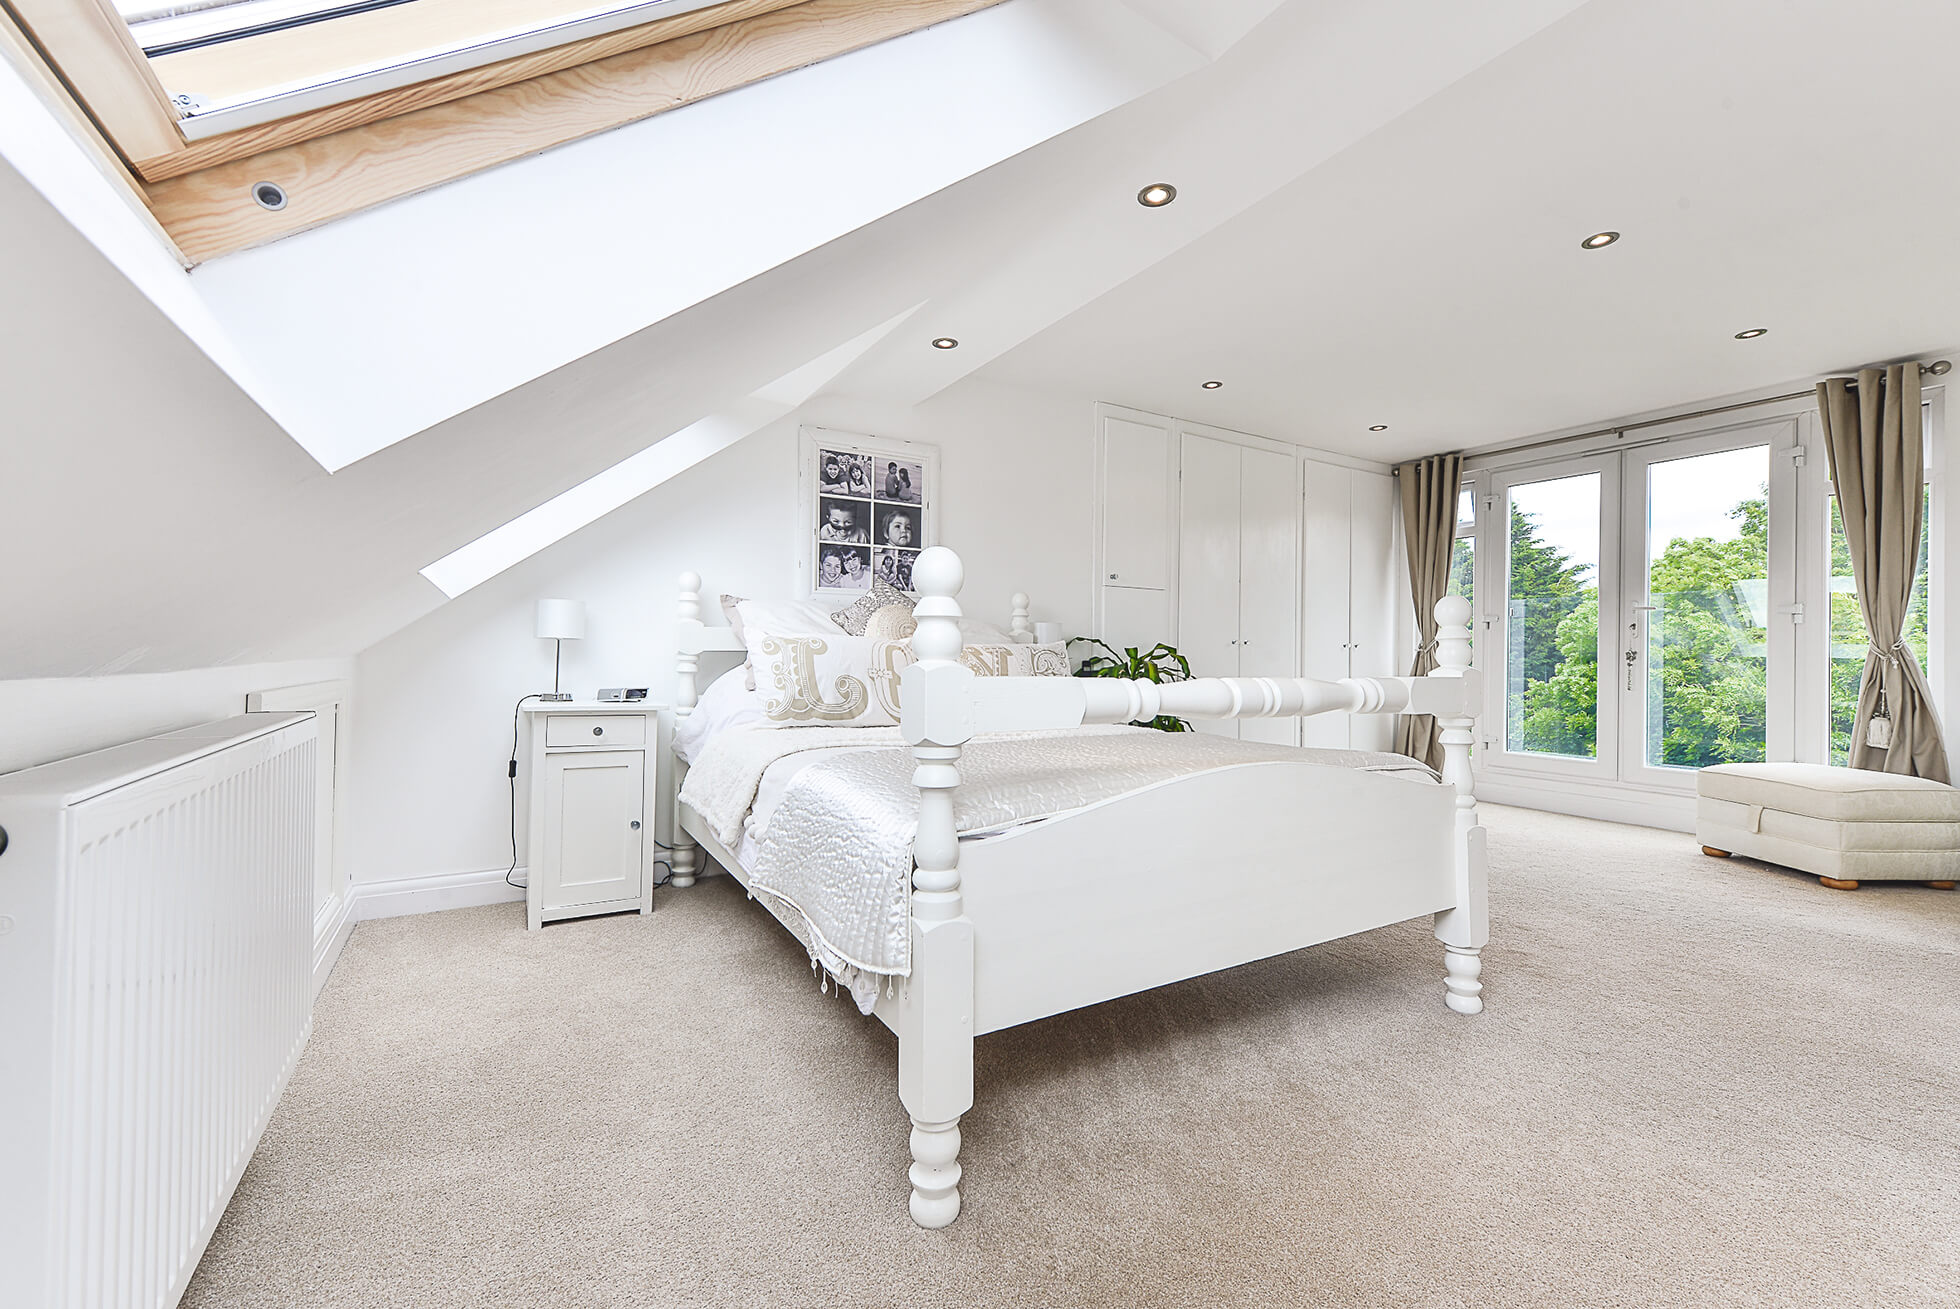 Do you have a question about converting your Loft in Woolmer Green? Here are the most popular questions asked by our clients.